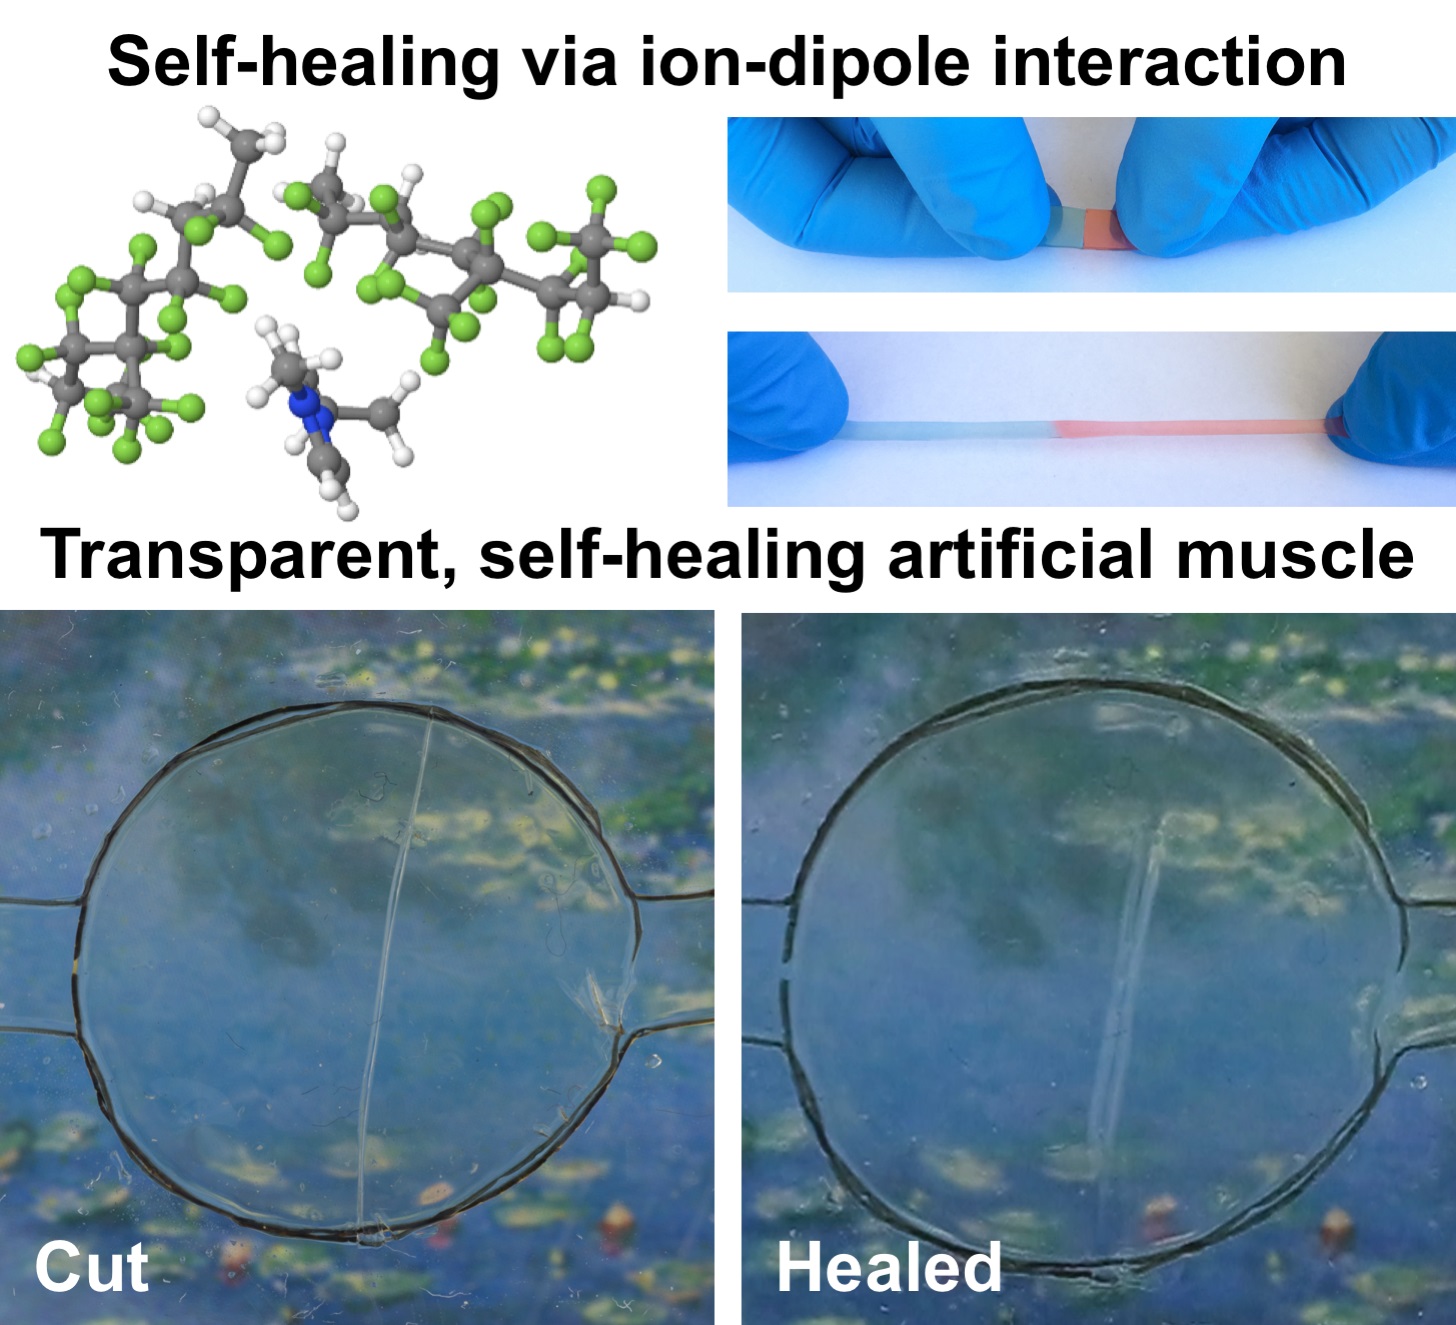 Wolverine-inspired transparent material is self-healing